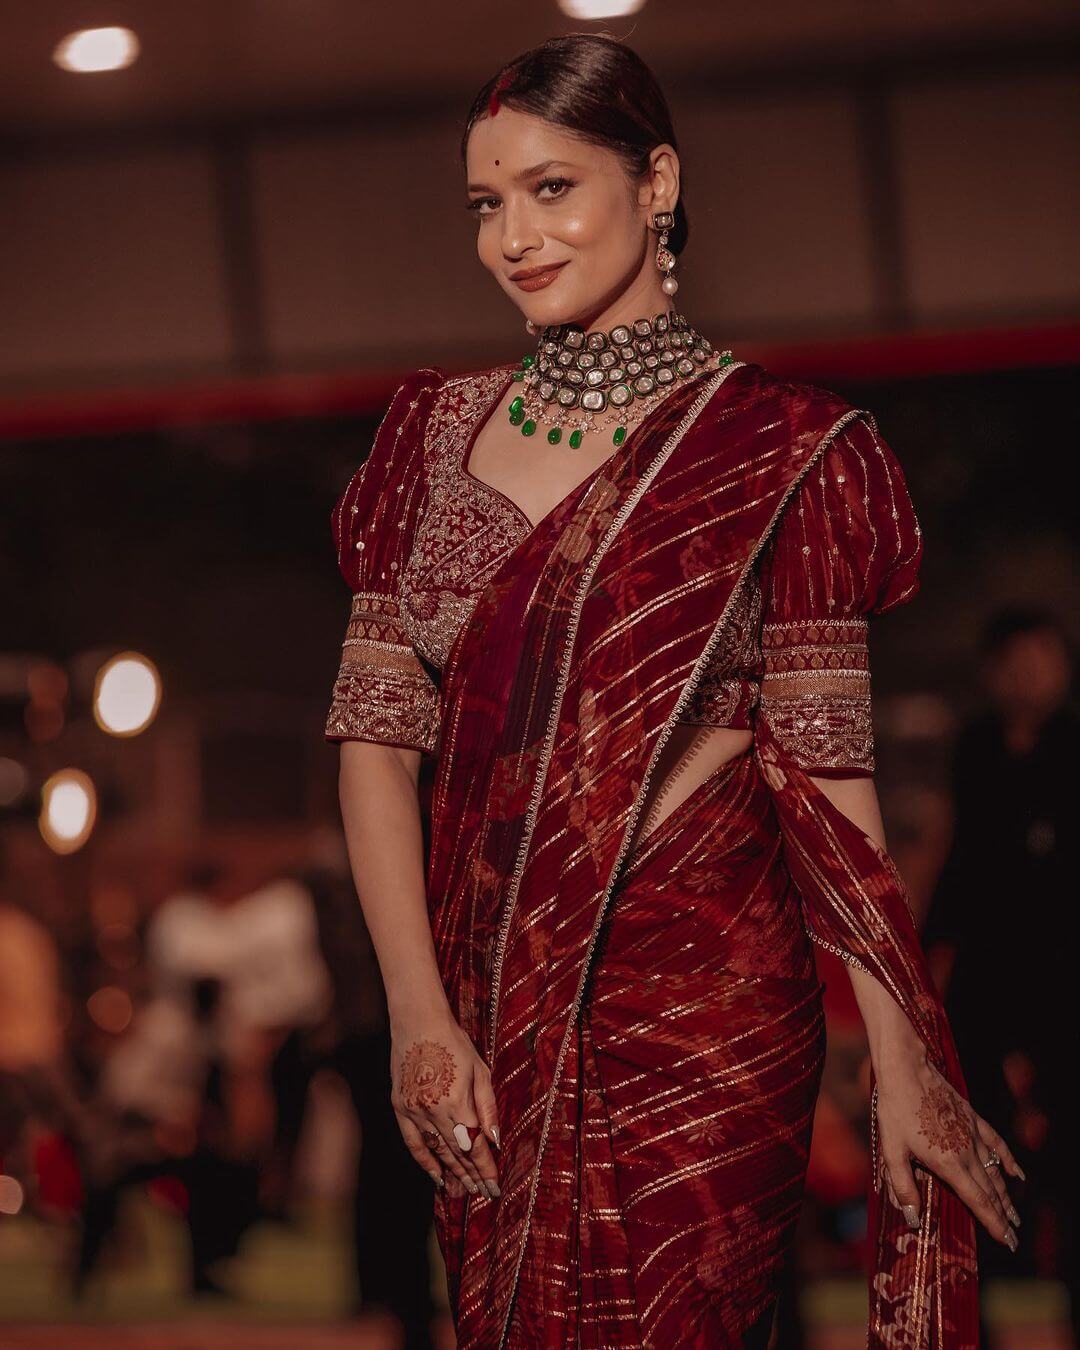 Ankita Lokhande Nails Wedding Fashion Yet Again In Red Embroidered Saree With Polki Jewellery Set